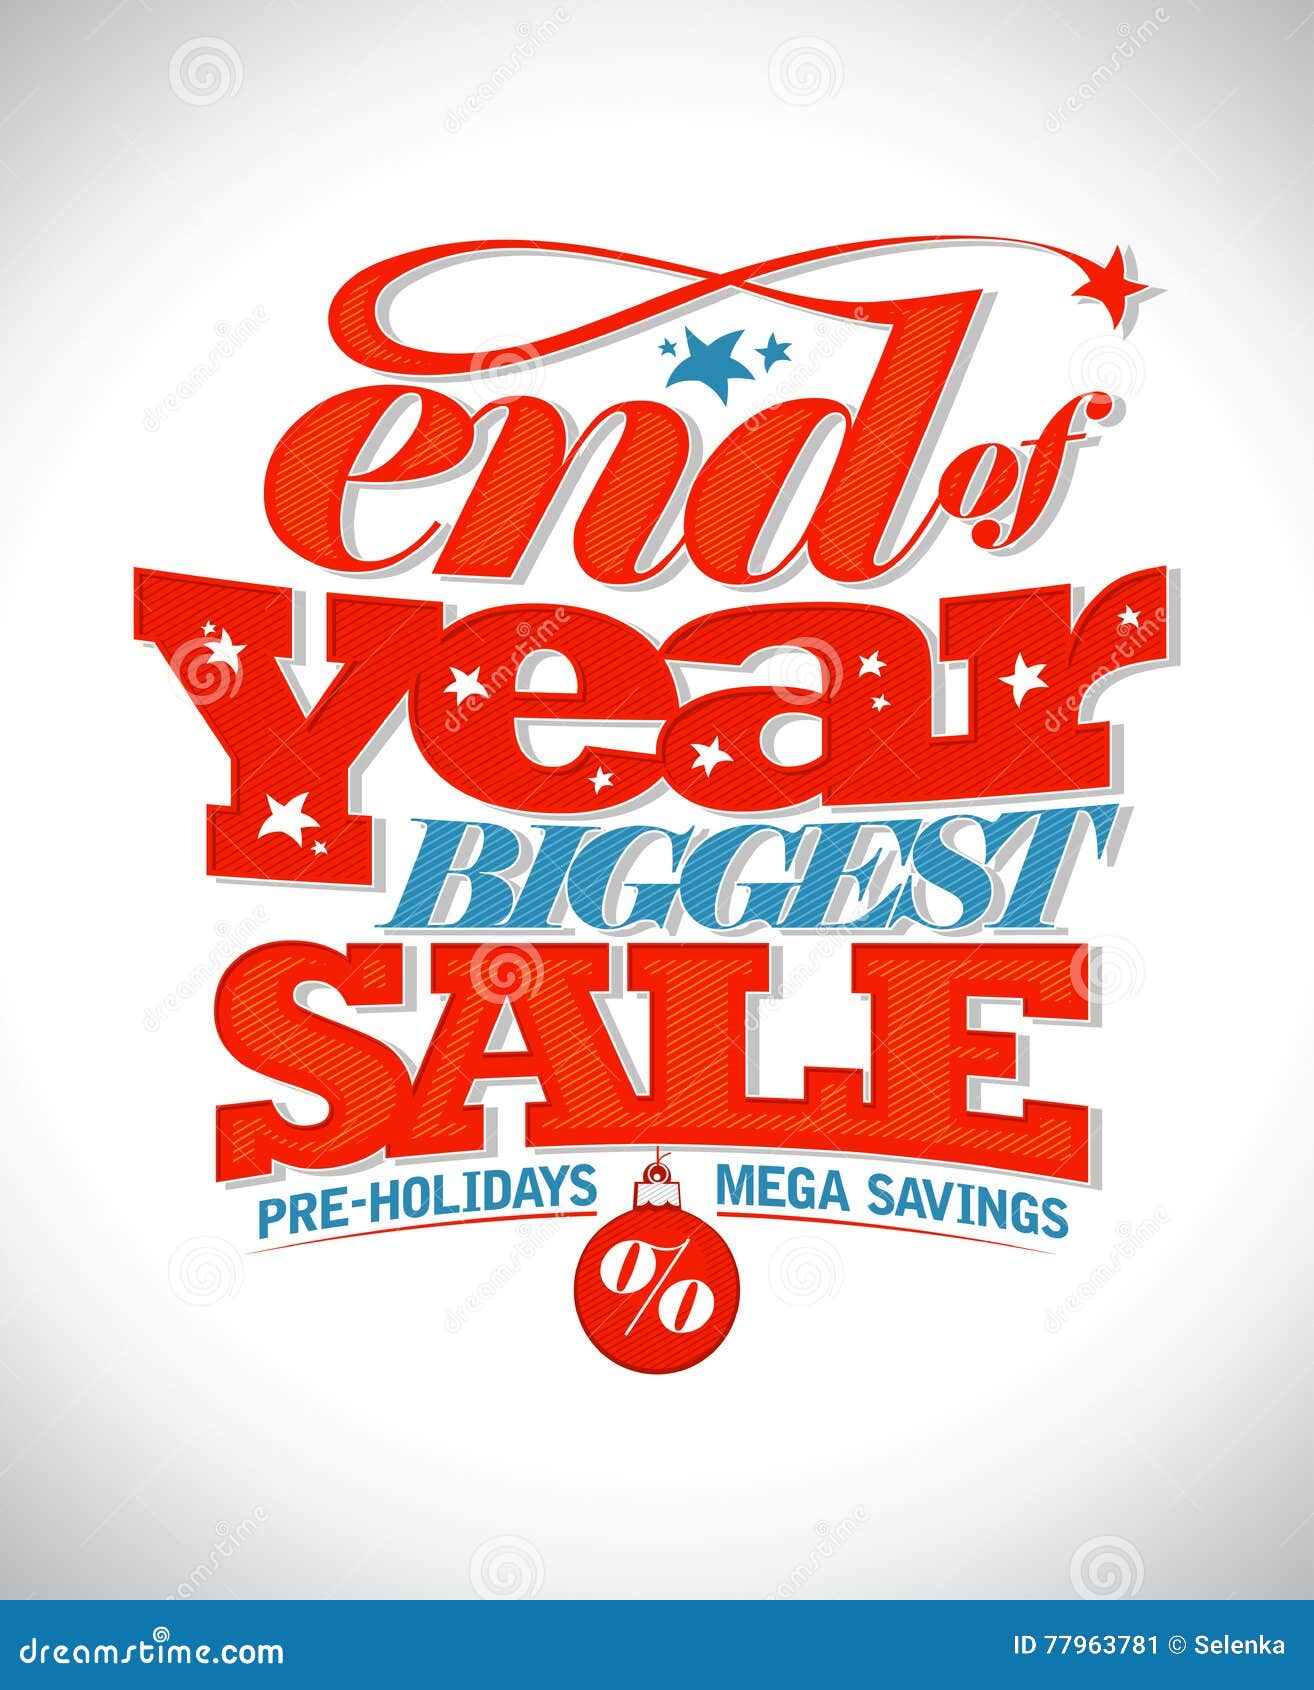 end of year biggest sale banner.